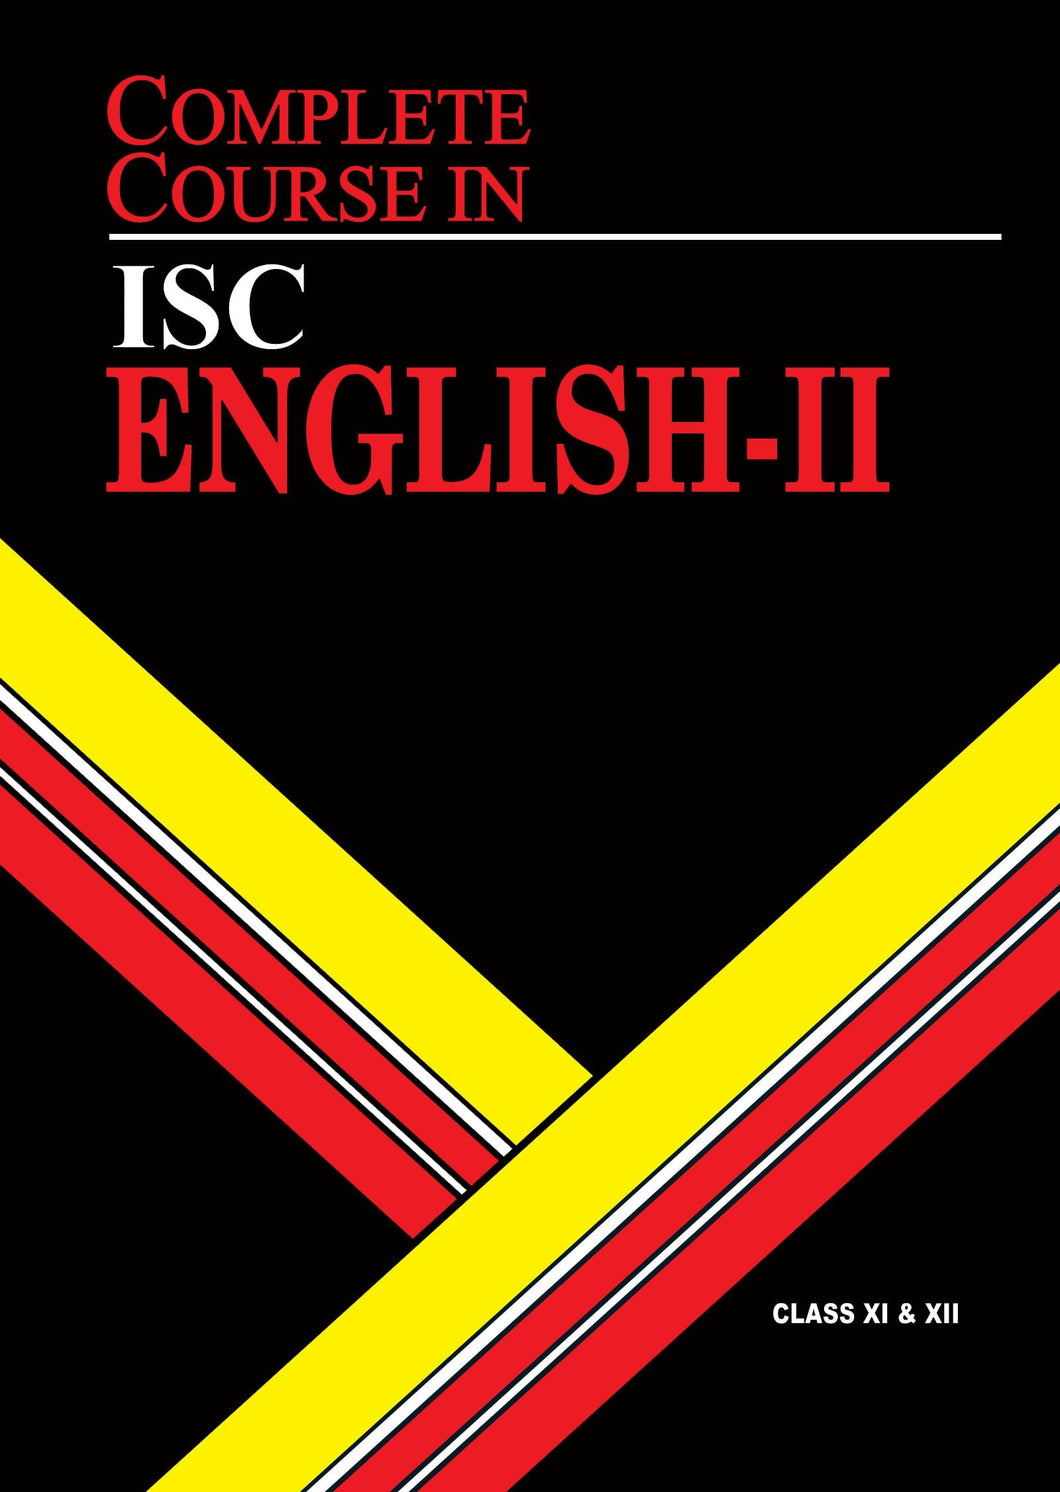 Oswal Complete Course English 2: ISC Class 11 & 12